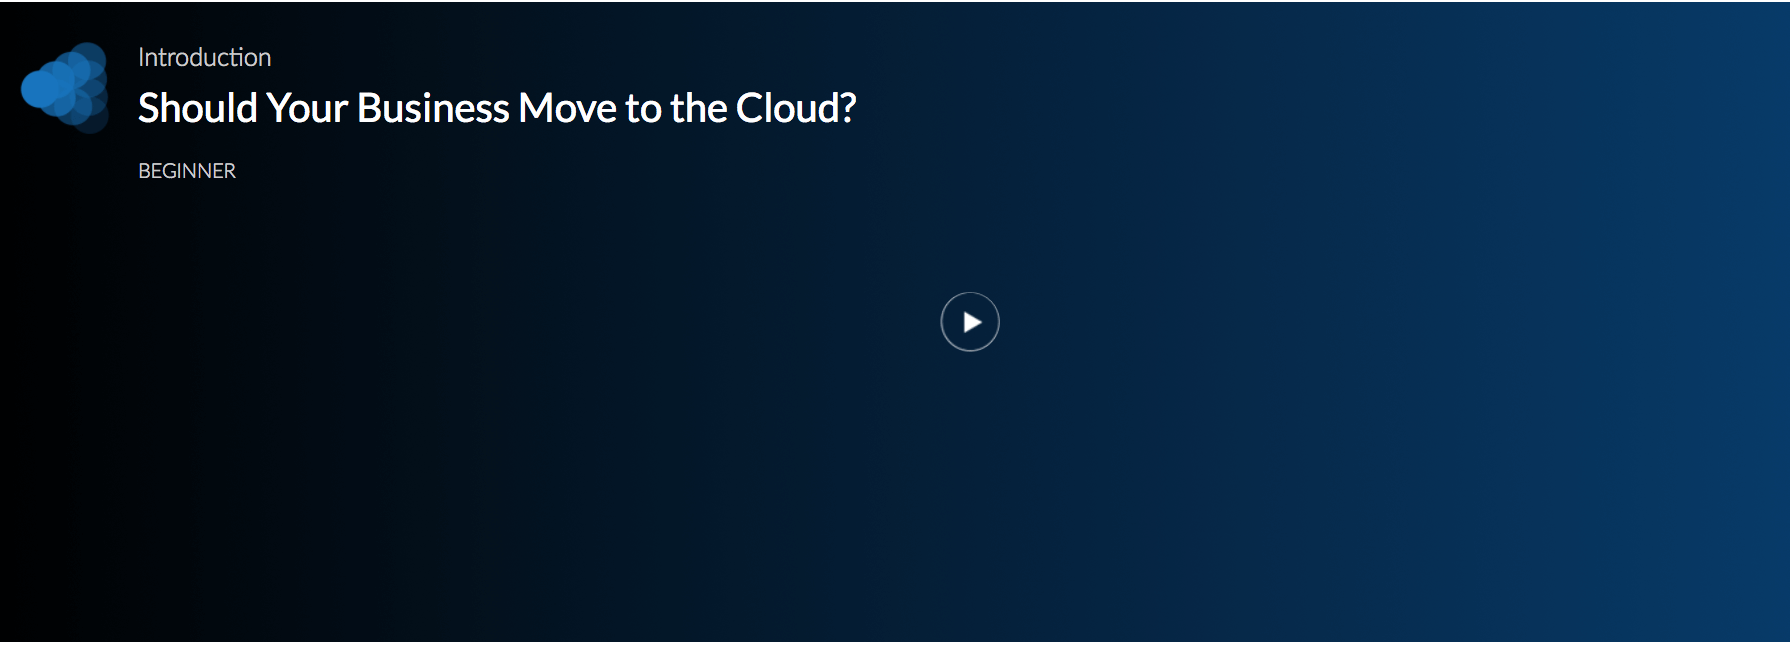 Should your business move to the cloud? 